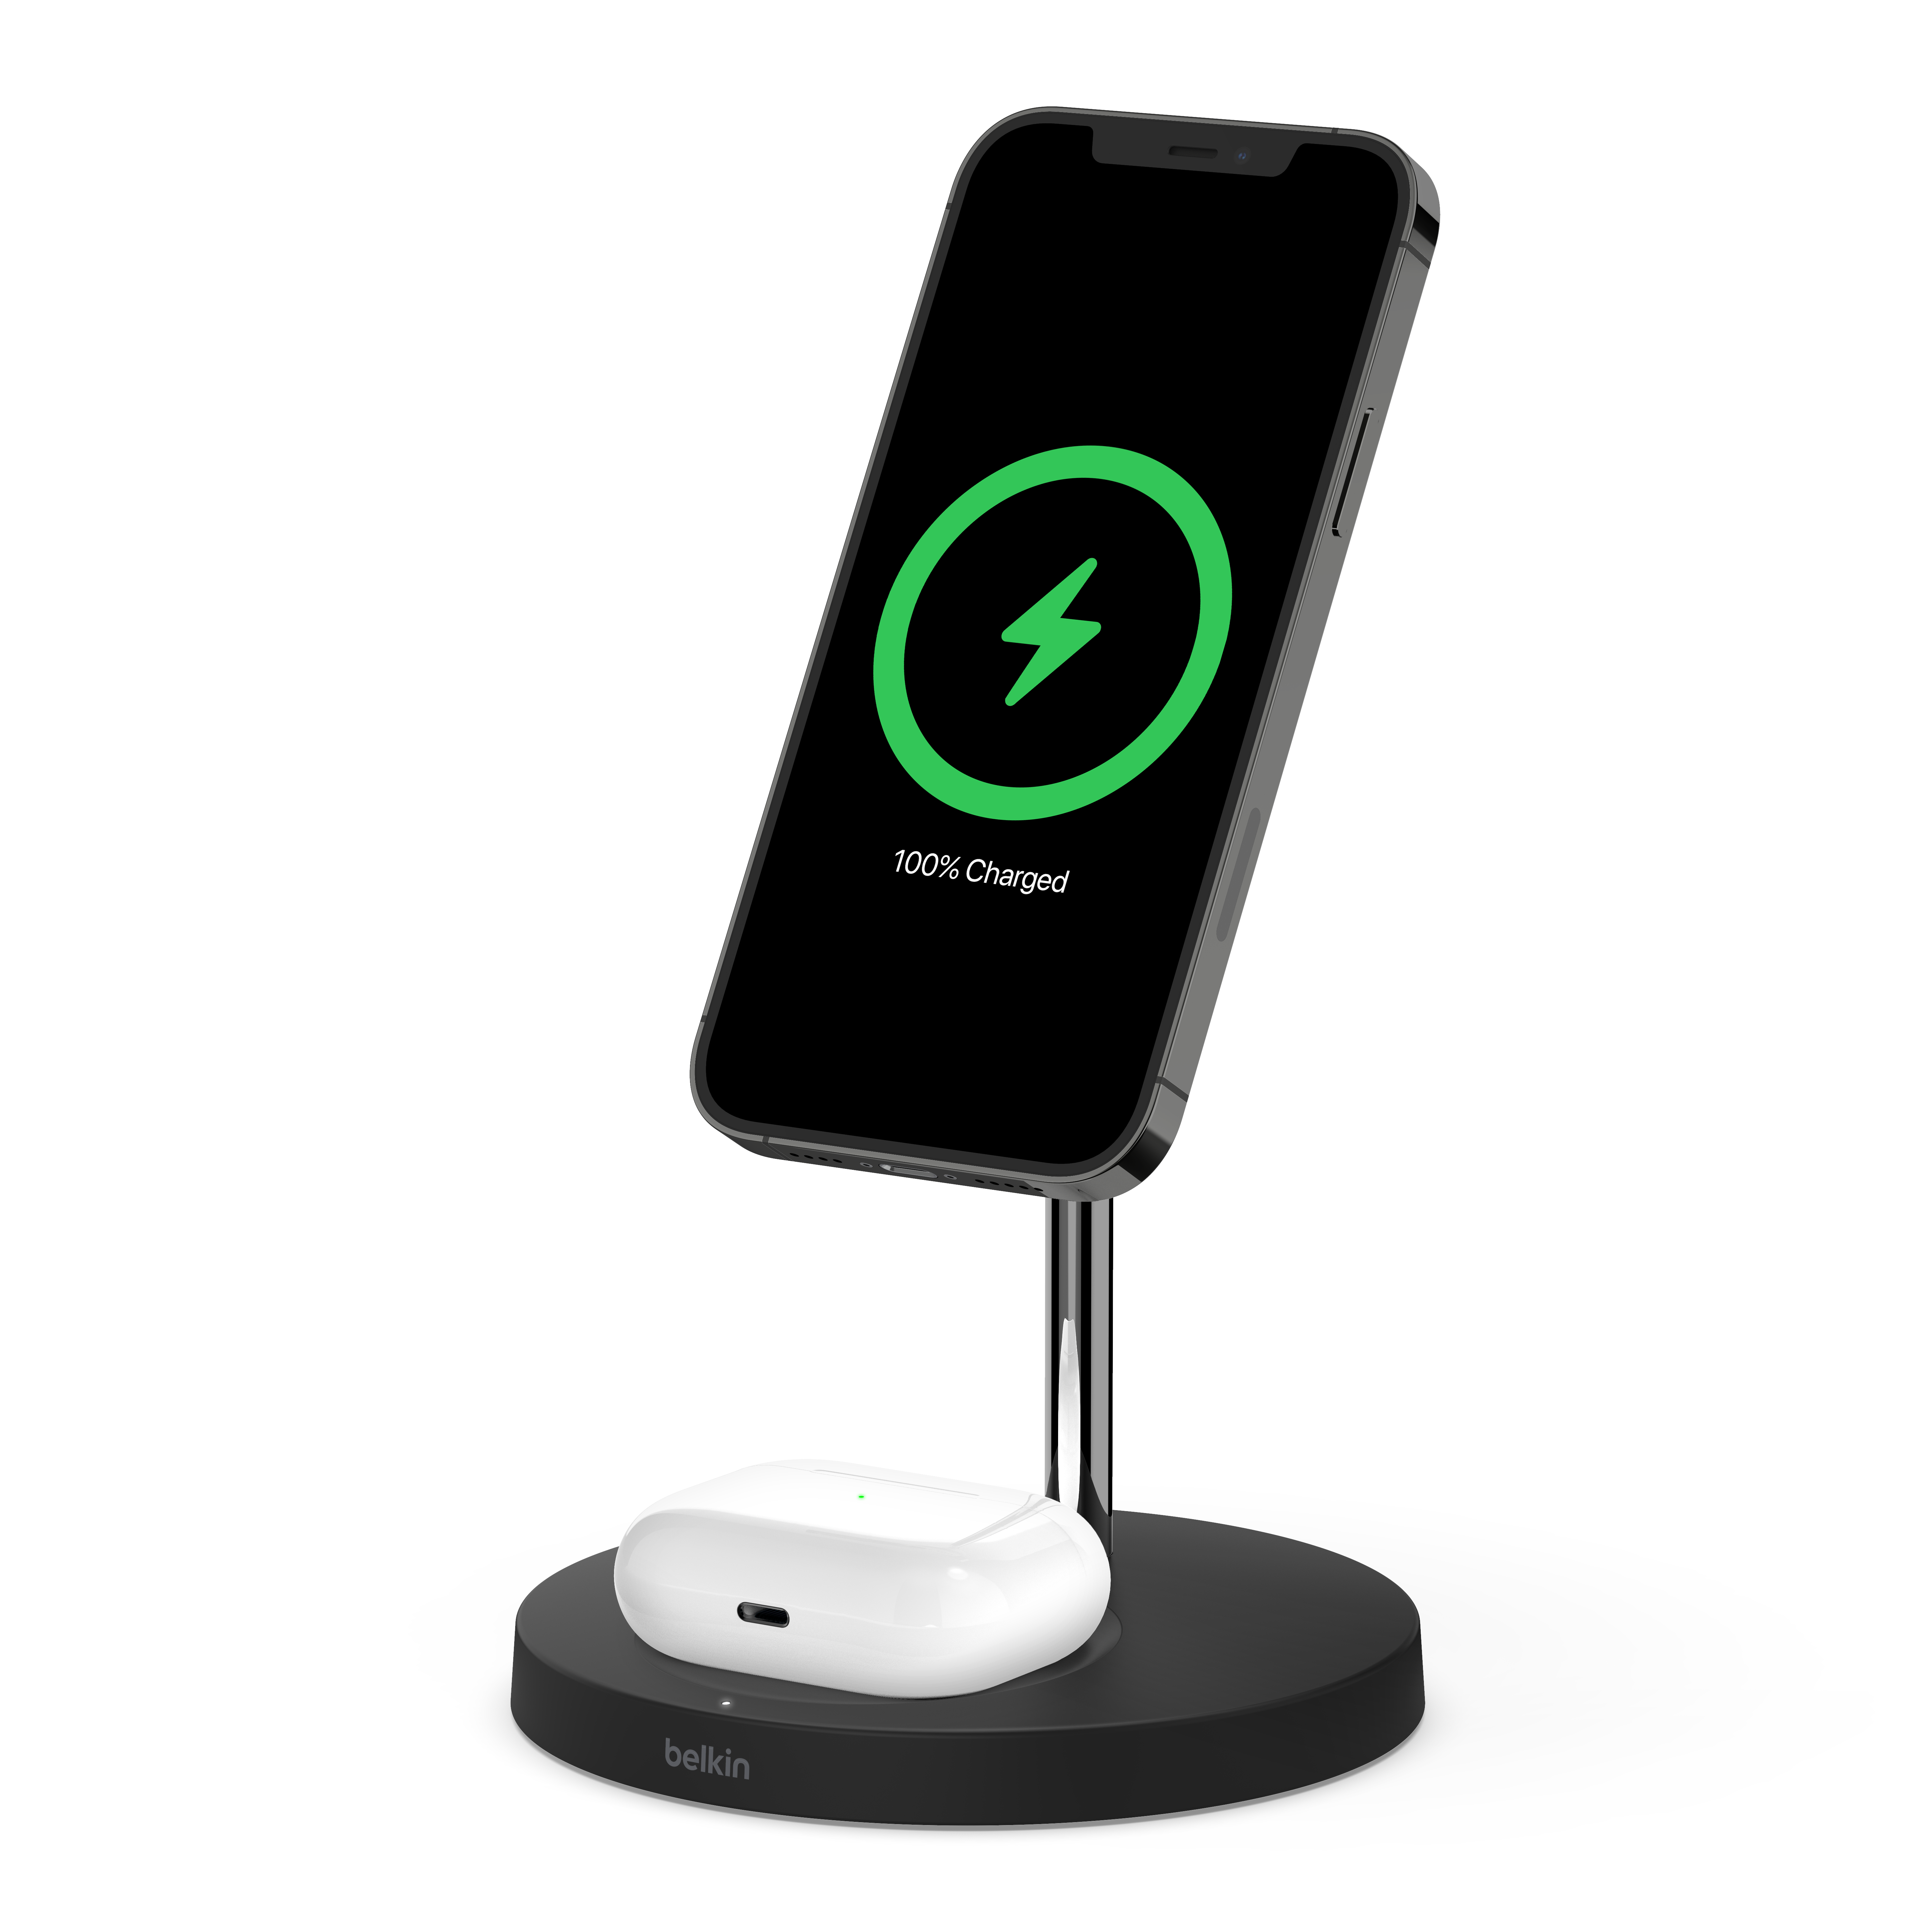 Cool Charger Holder Smartphone Gadgets Cell Phone wall charging station  FELT docking accessory minimalist design organizer cord management